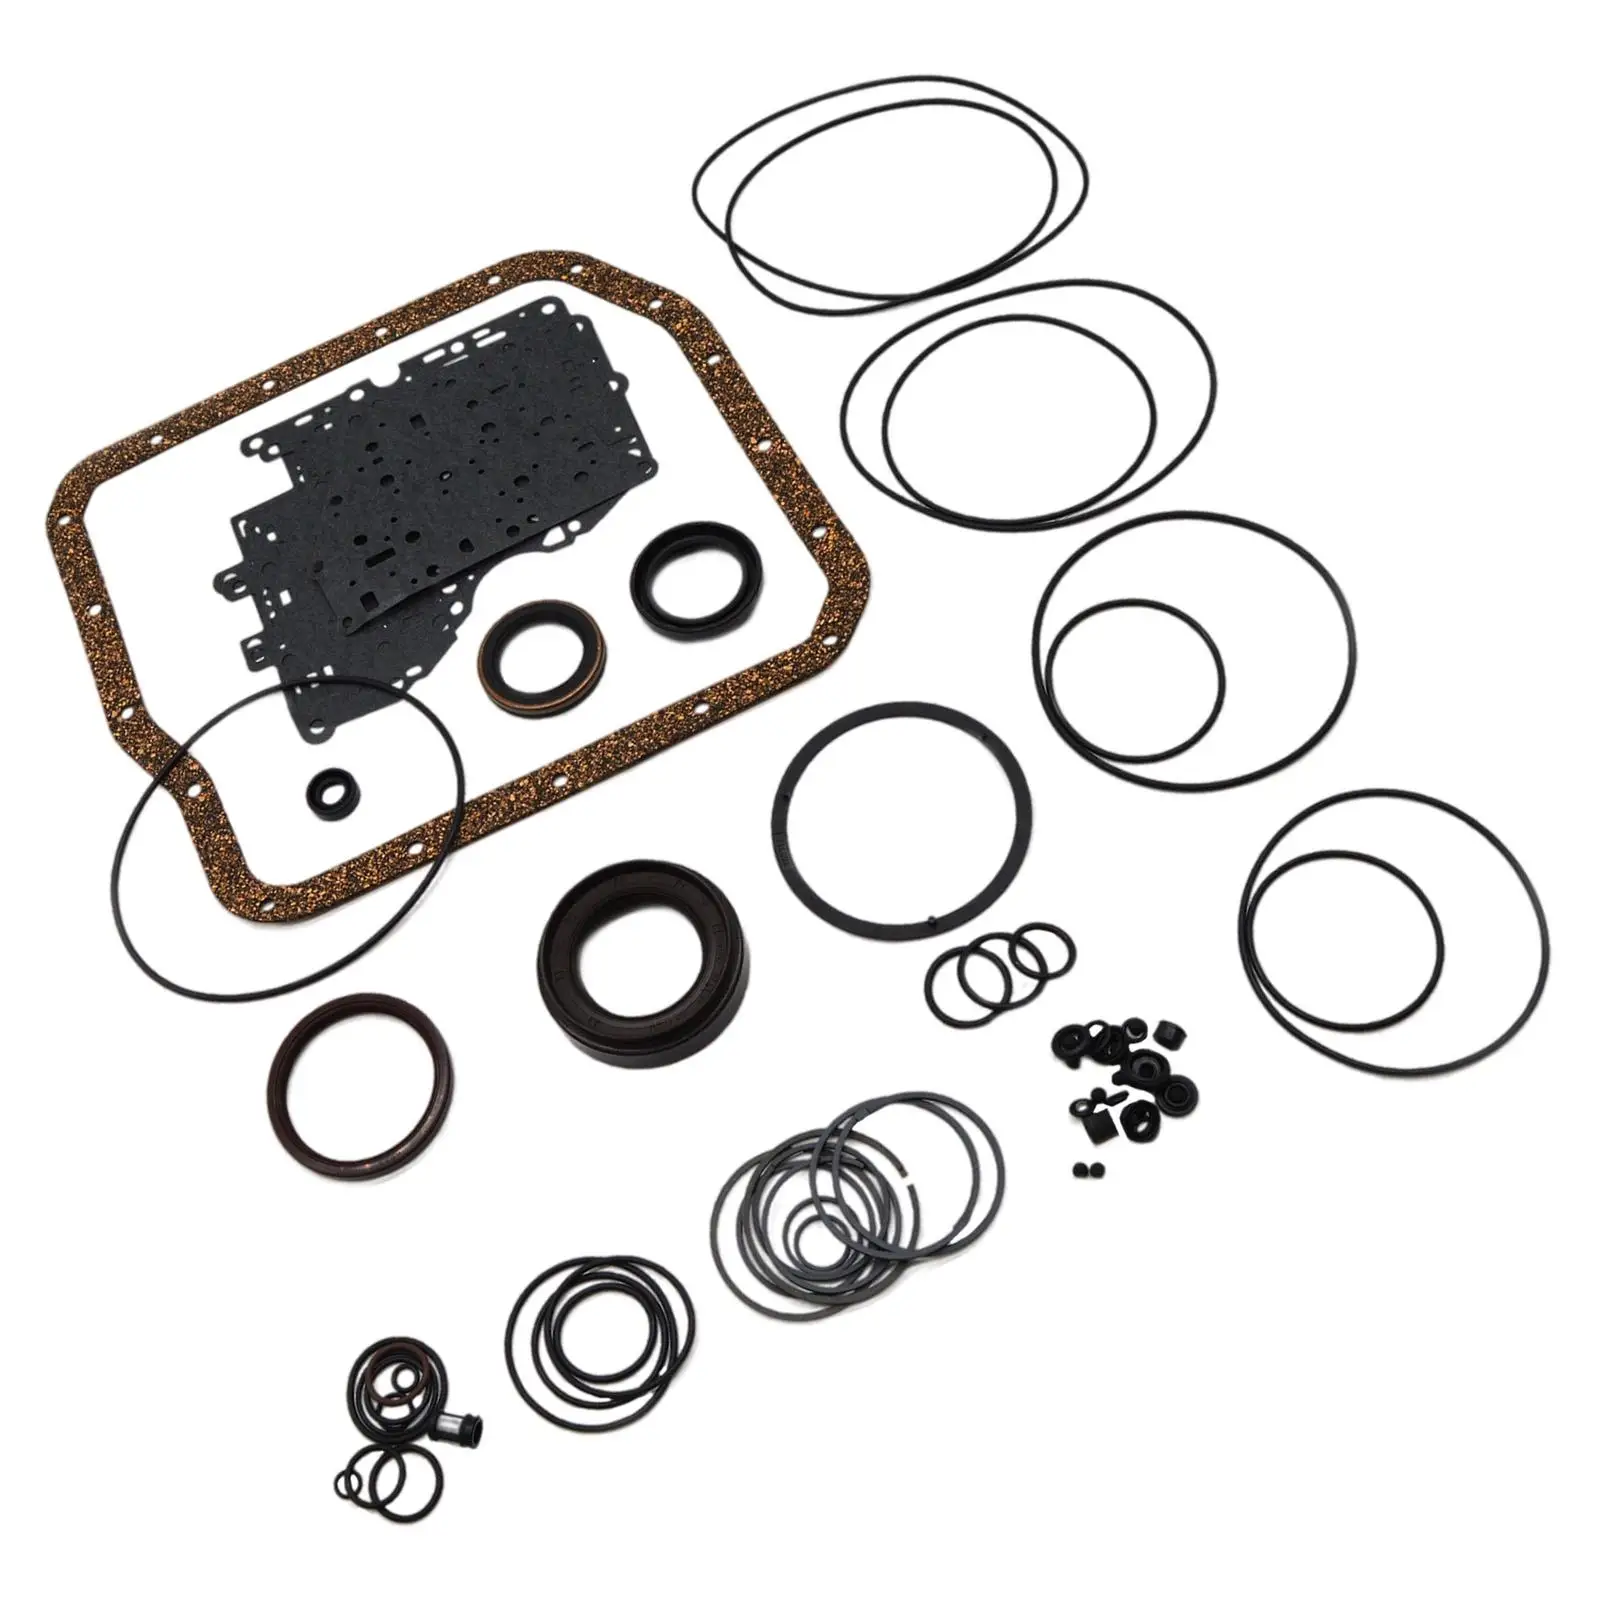 U151e Transmission Overhaul Rebuild Kit Easy Installation Assembly Minor Repair Kit Fits For Seine 3 3 B1360c 4wd Automatic Transmission Parts Aliexpress